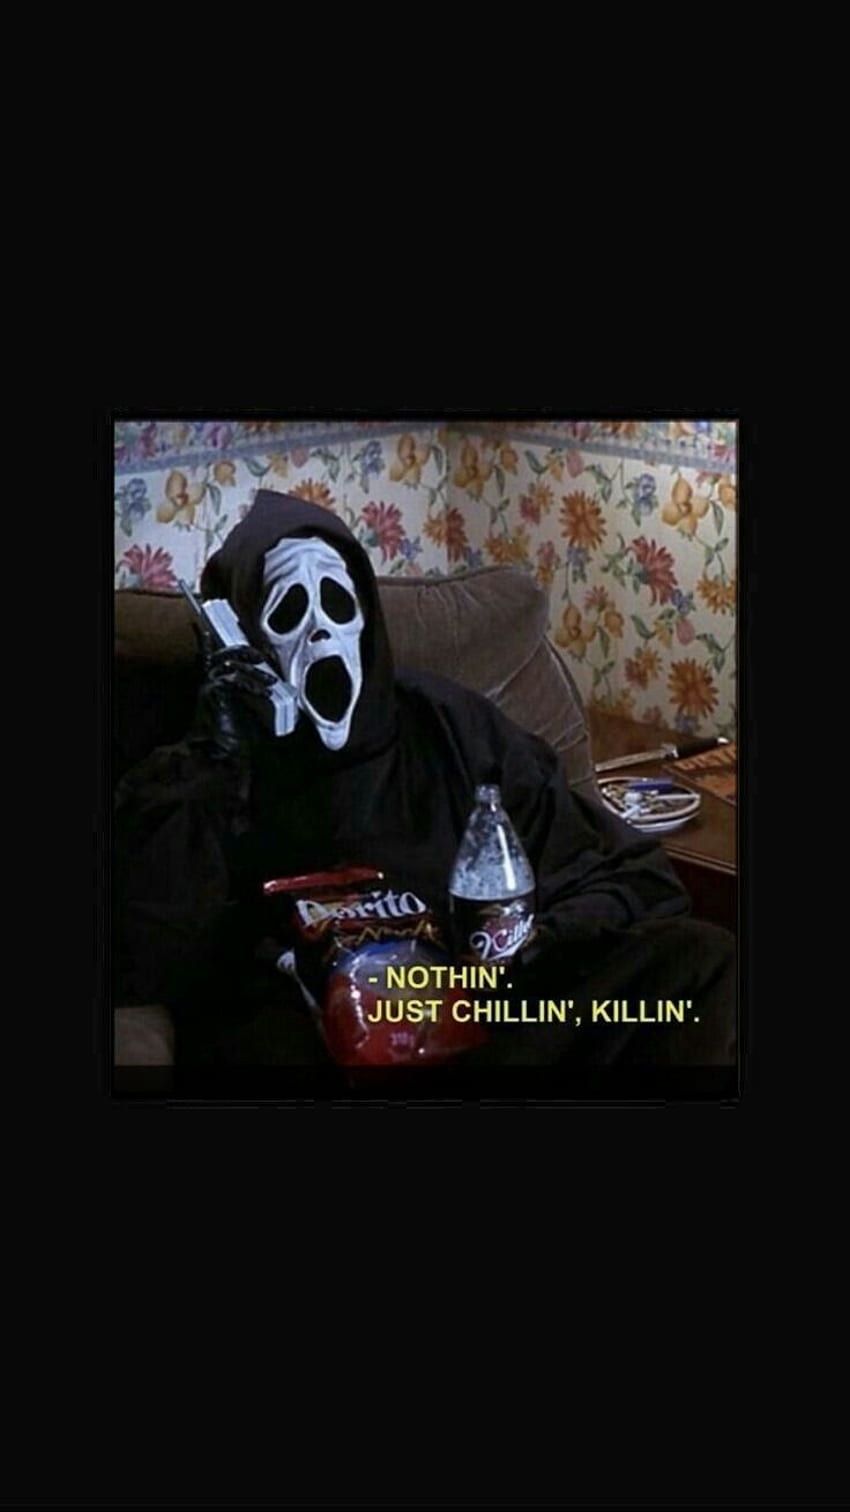 A black background with a picture of Ghostface from the movie Scream sitting on a couch with a caption that says 